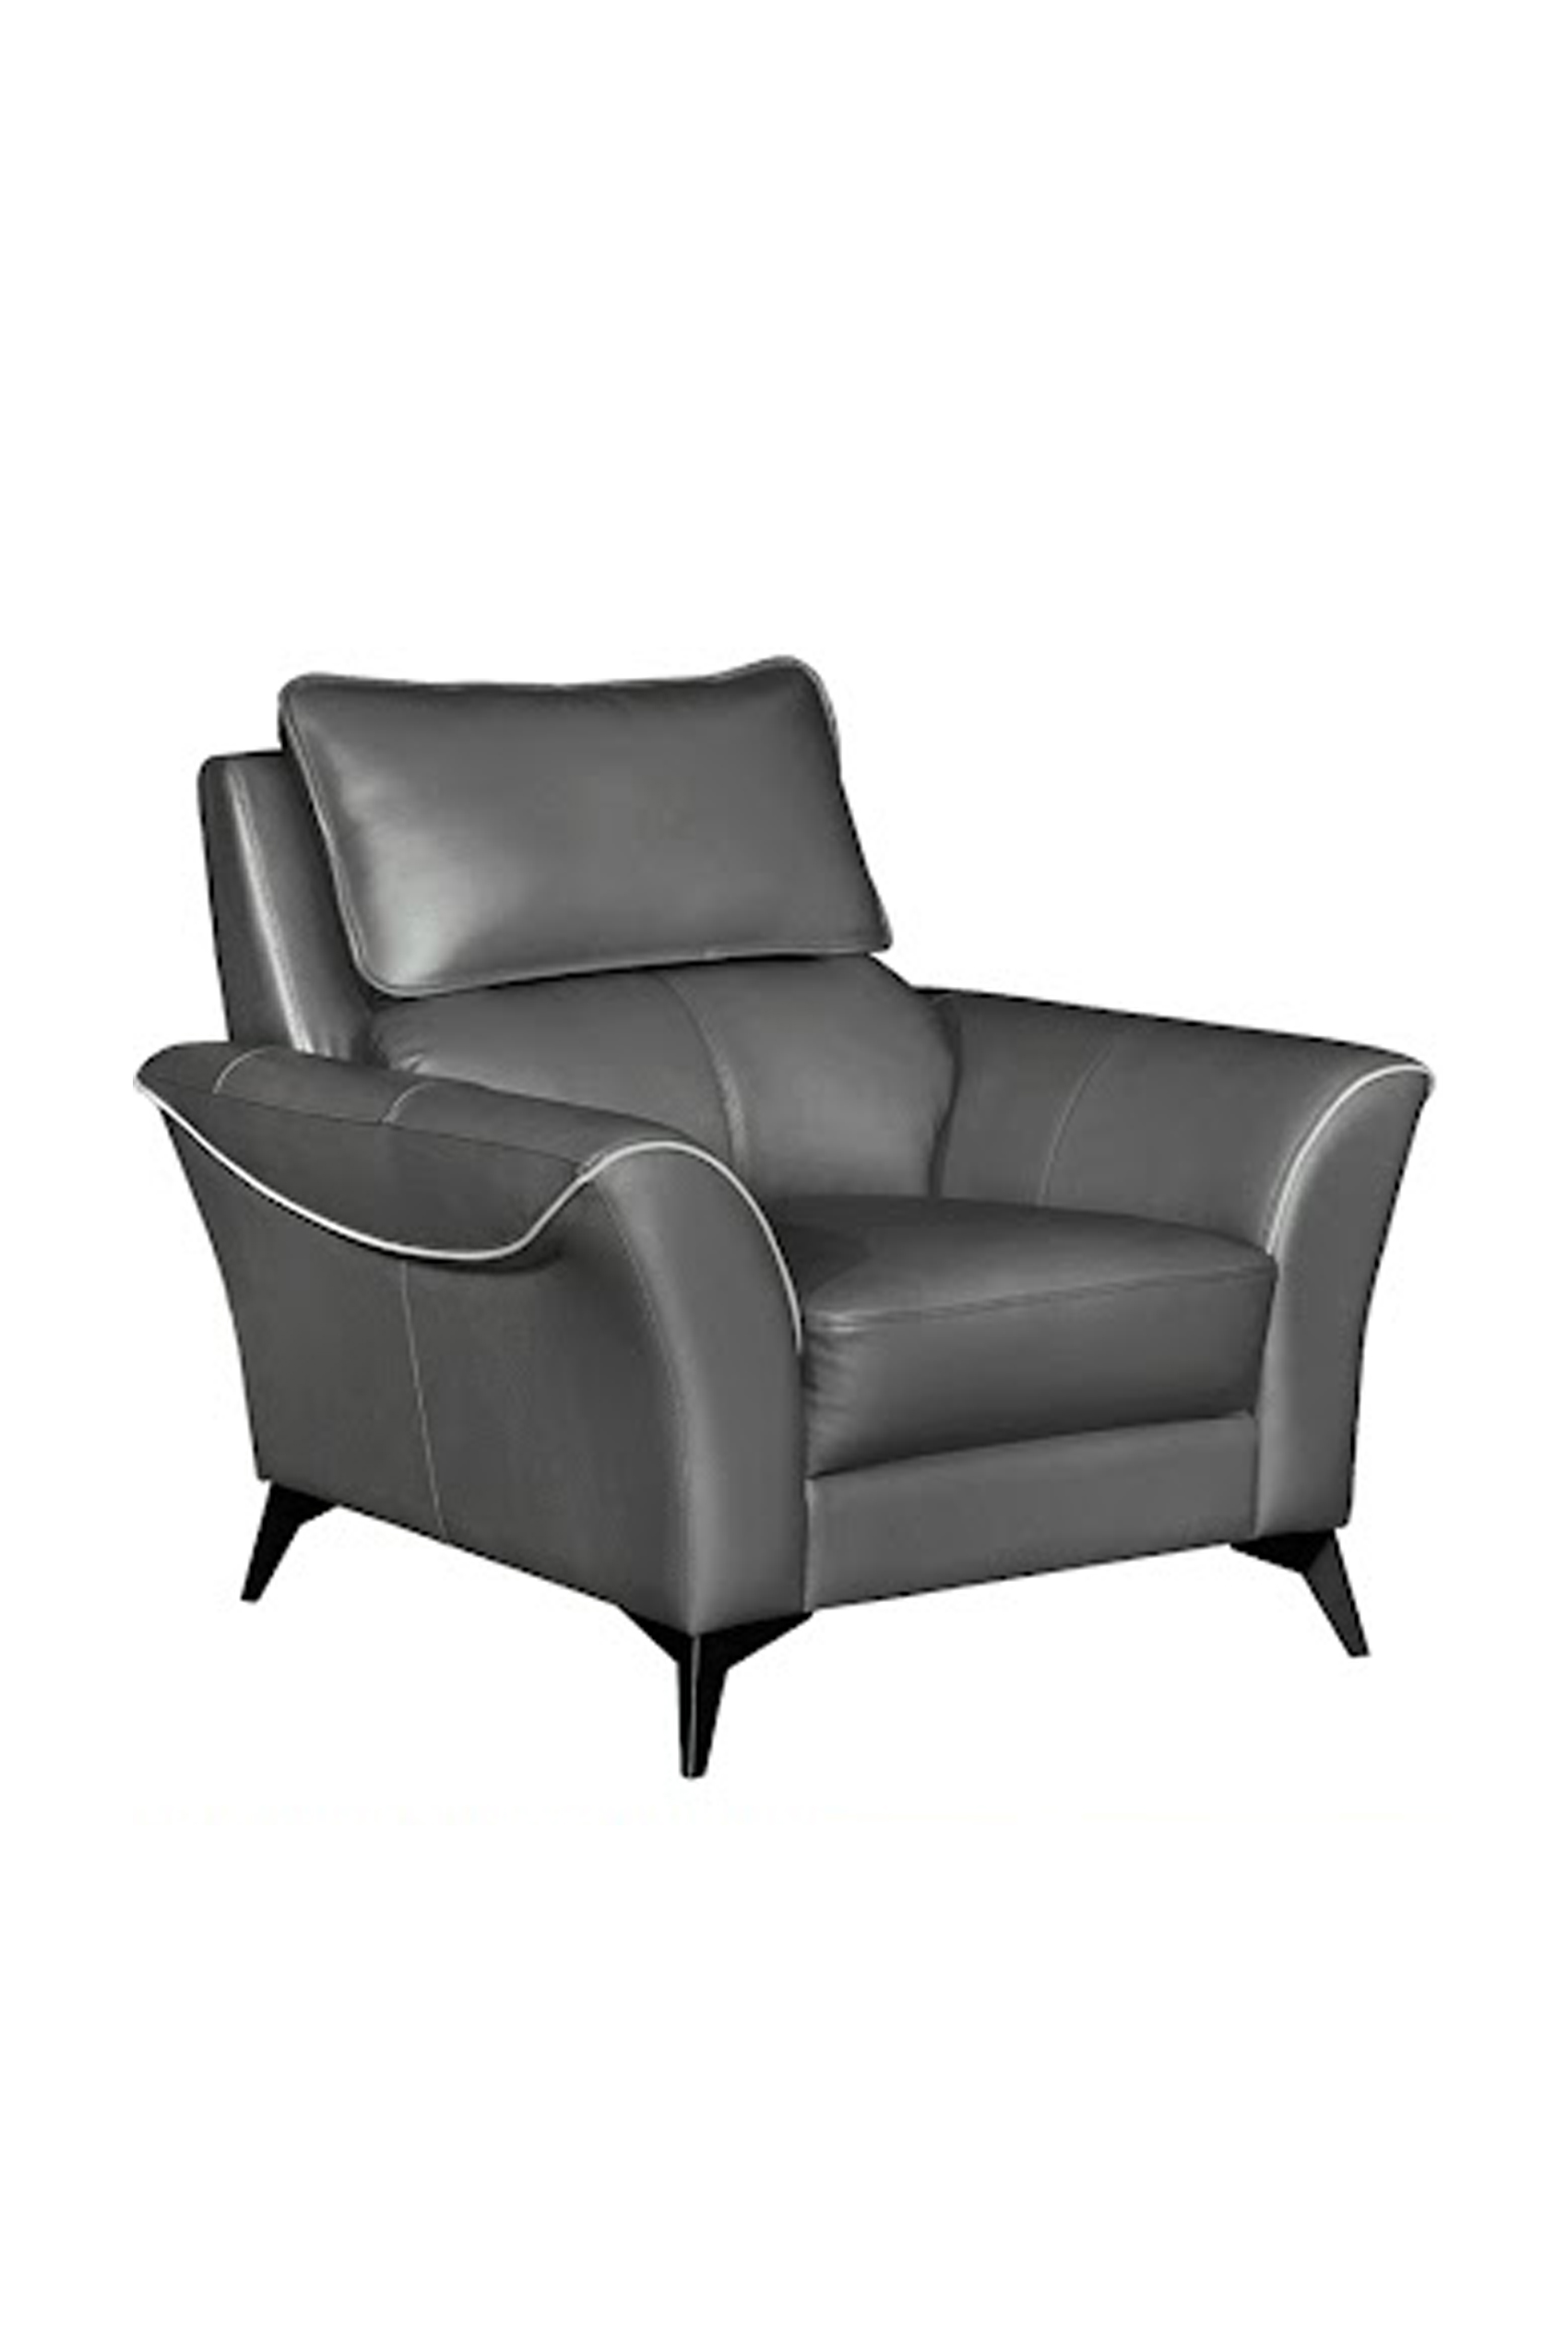 Gatto Leather Seater Sofa with High Backrest